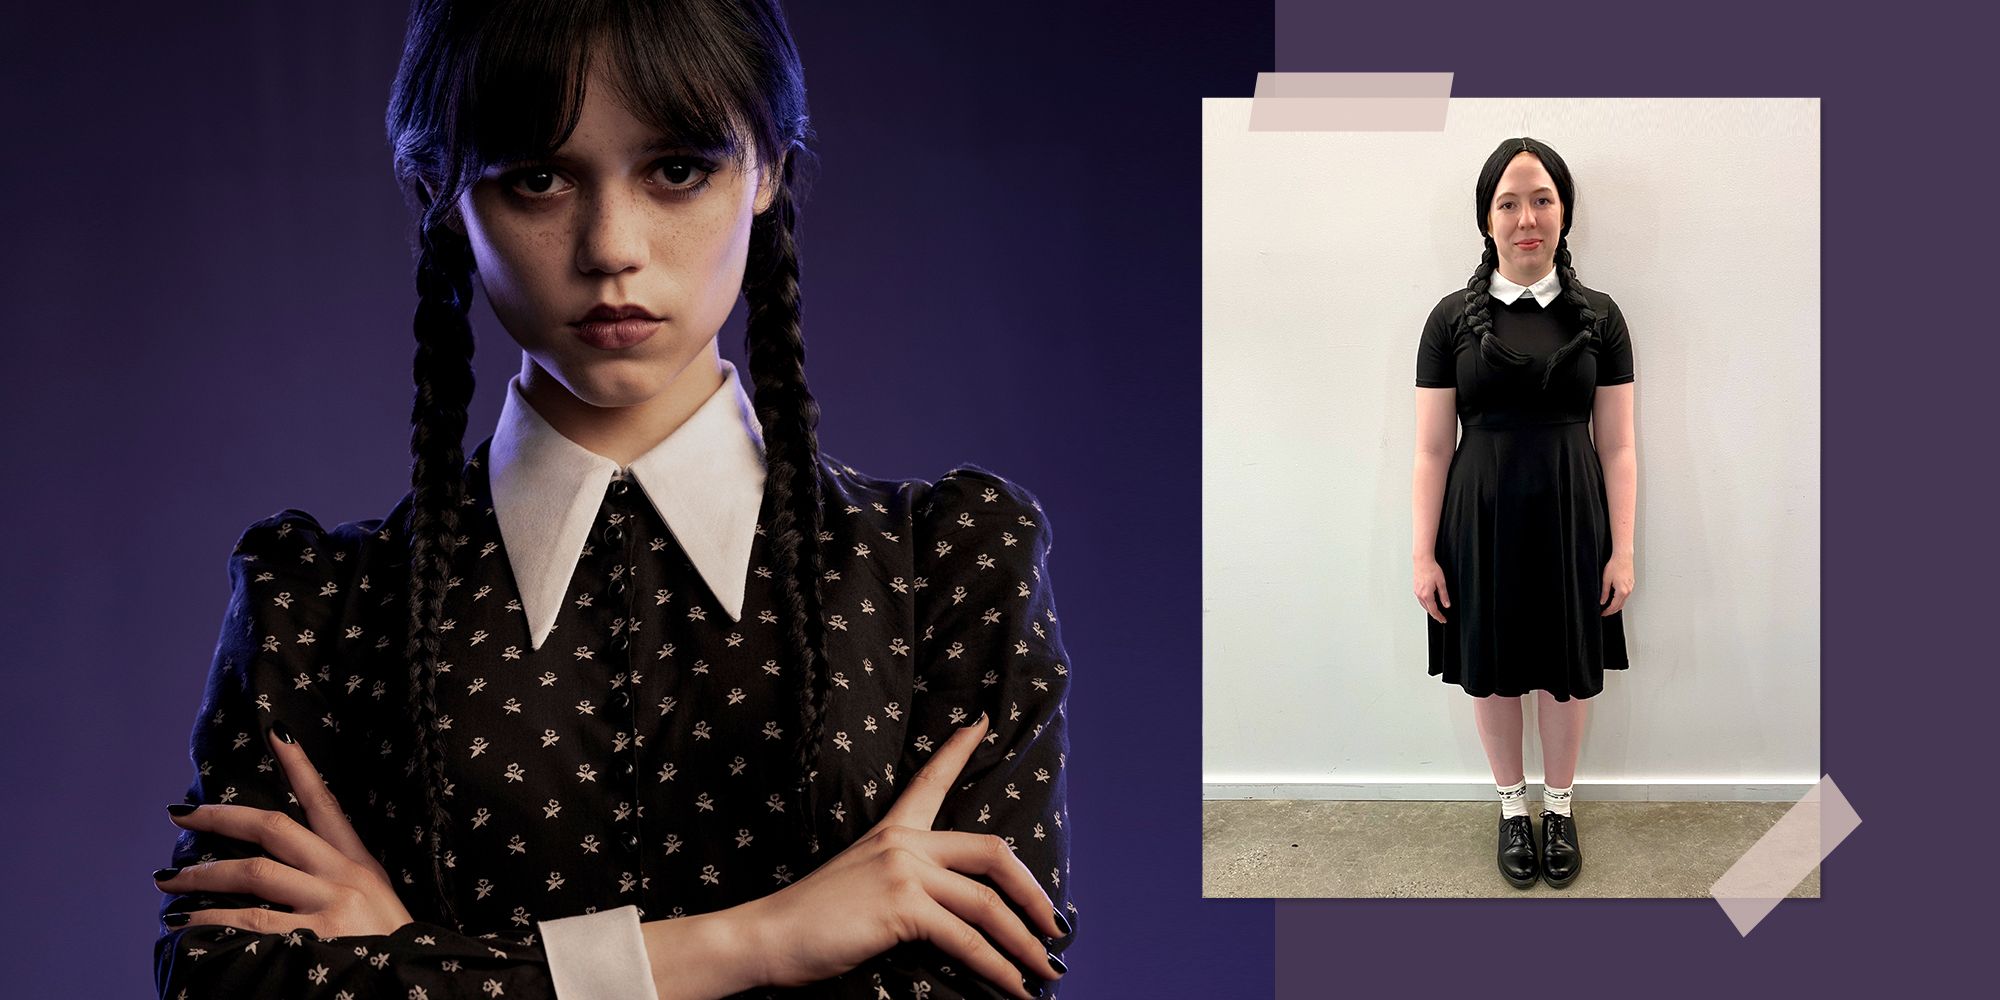 Adult Wednesday 2022 Wednesday Addams Black Dress Cosplay Costume Outfits 